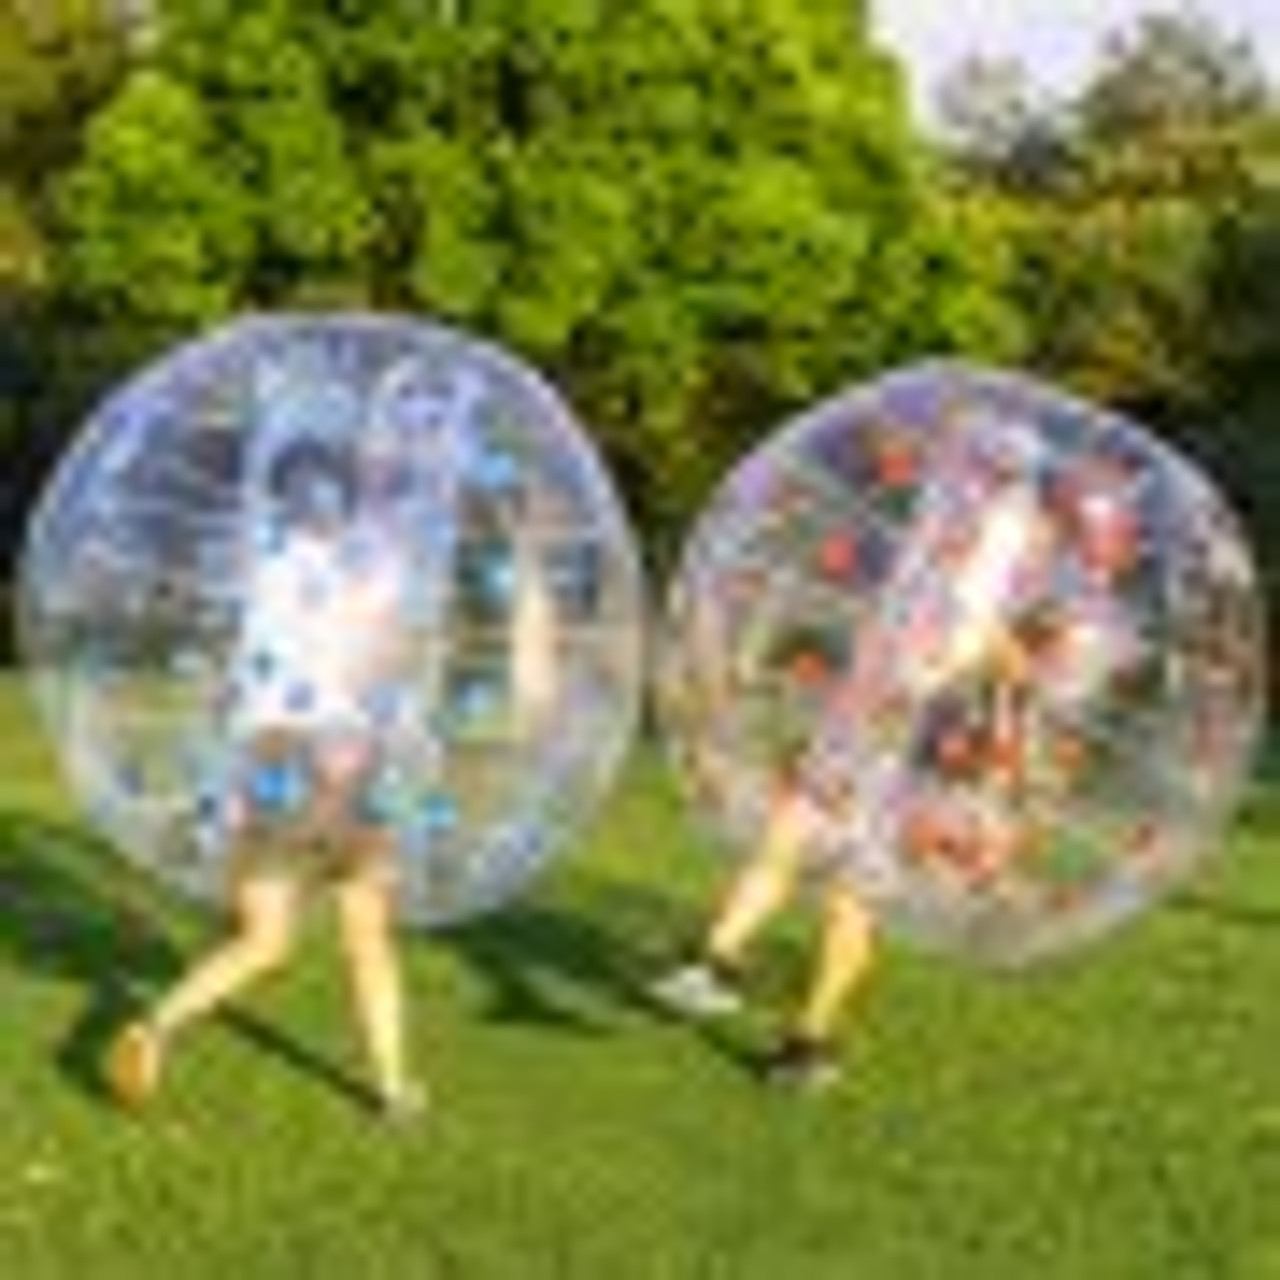 Inflatable Bumper Ball 5 FT / 1.5M Diameter, Bubble Soccer Ball, Blow It Up in 5 Min, Inflatable Zorb Ball for Adults or Children (5 FT, Blue Dot)